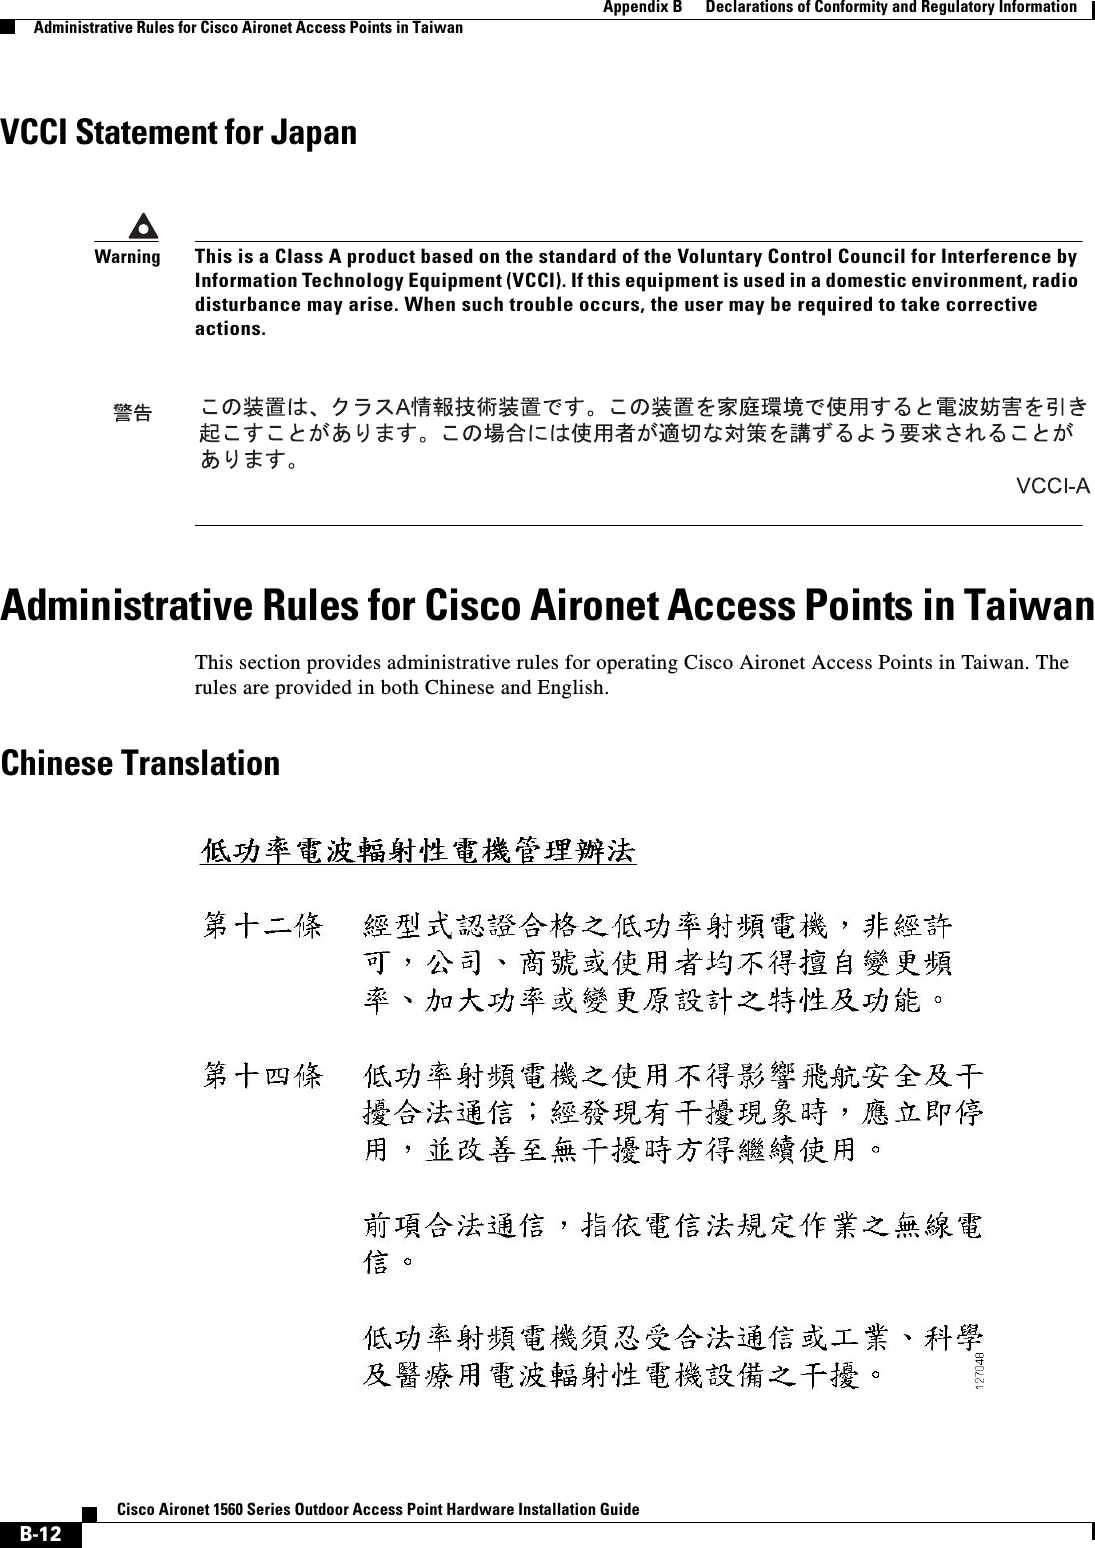  B-12Cisco Aironet 1560 Series Outdoor Access Point Hardware Installation Guide Appendix B      Declarations of Conformity and Regulatory InformationAdministrative Rules for Cisco Aironet Access Points in TaiwanVCCI Statement for JapanAdministrative Rules for Cisco Aironet Access Points in TaiwanThis section provides administrative rules for operating Cisco Aironet Access Points in Taiwan. The rules are provided in both Chinese and English.Chinese TranslationWarningThis is a Class A product based on the standard of the Voluntary Control Council for Interference by Information Technology Equipment (VCCI). If this equipment is used in a domestic environment, radio disturbance may arise. When such trouble occurs, the user may be required to take corrective actions.